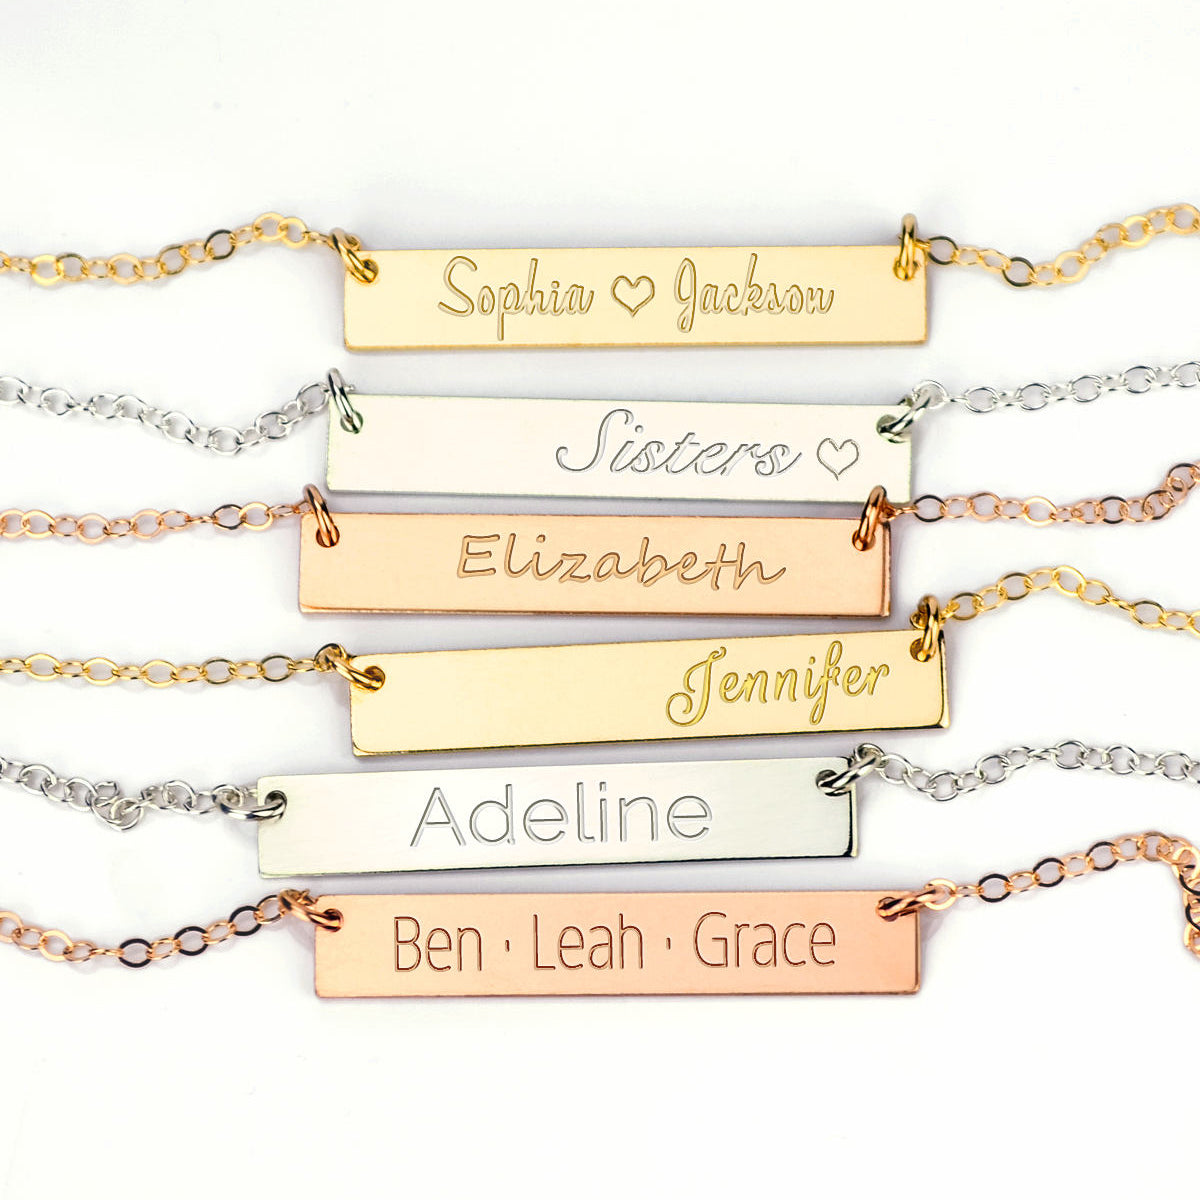 Delicate Layered Necklaces, Personalized Set, Gold Bar Necklace, Silver Disc Necklace, Sterling Silver, Rose Gold, Gold Plated GcB530hD13